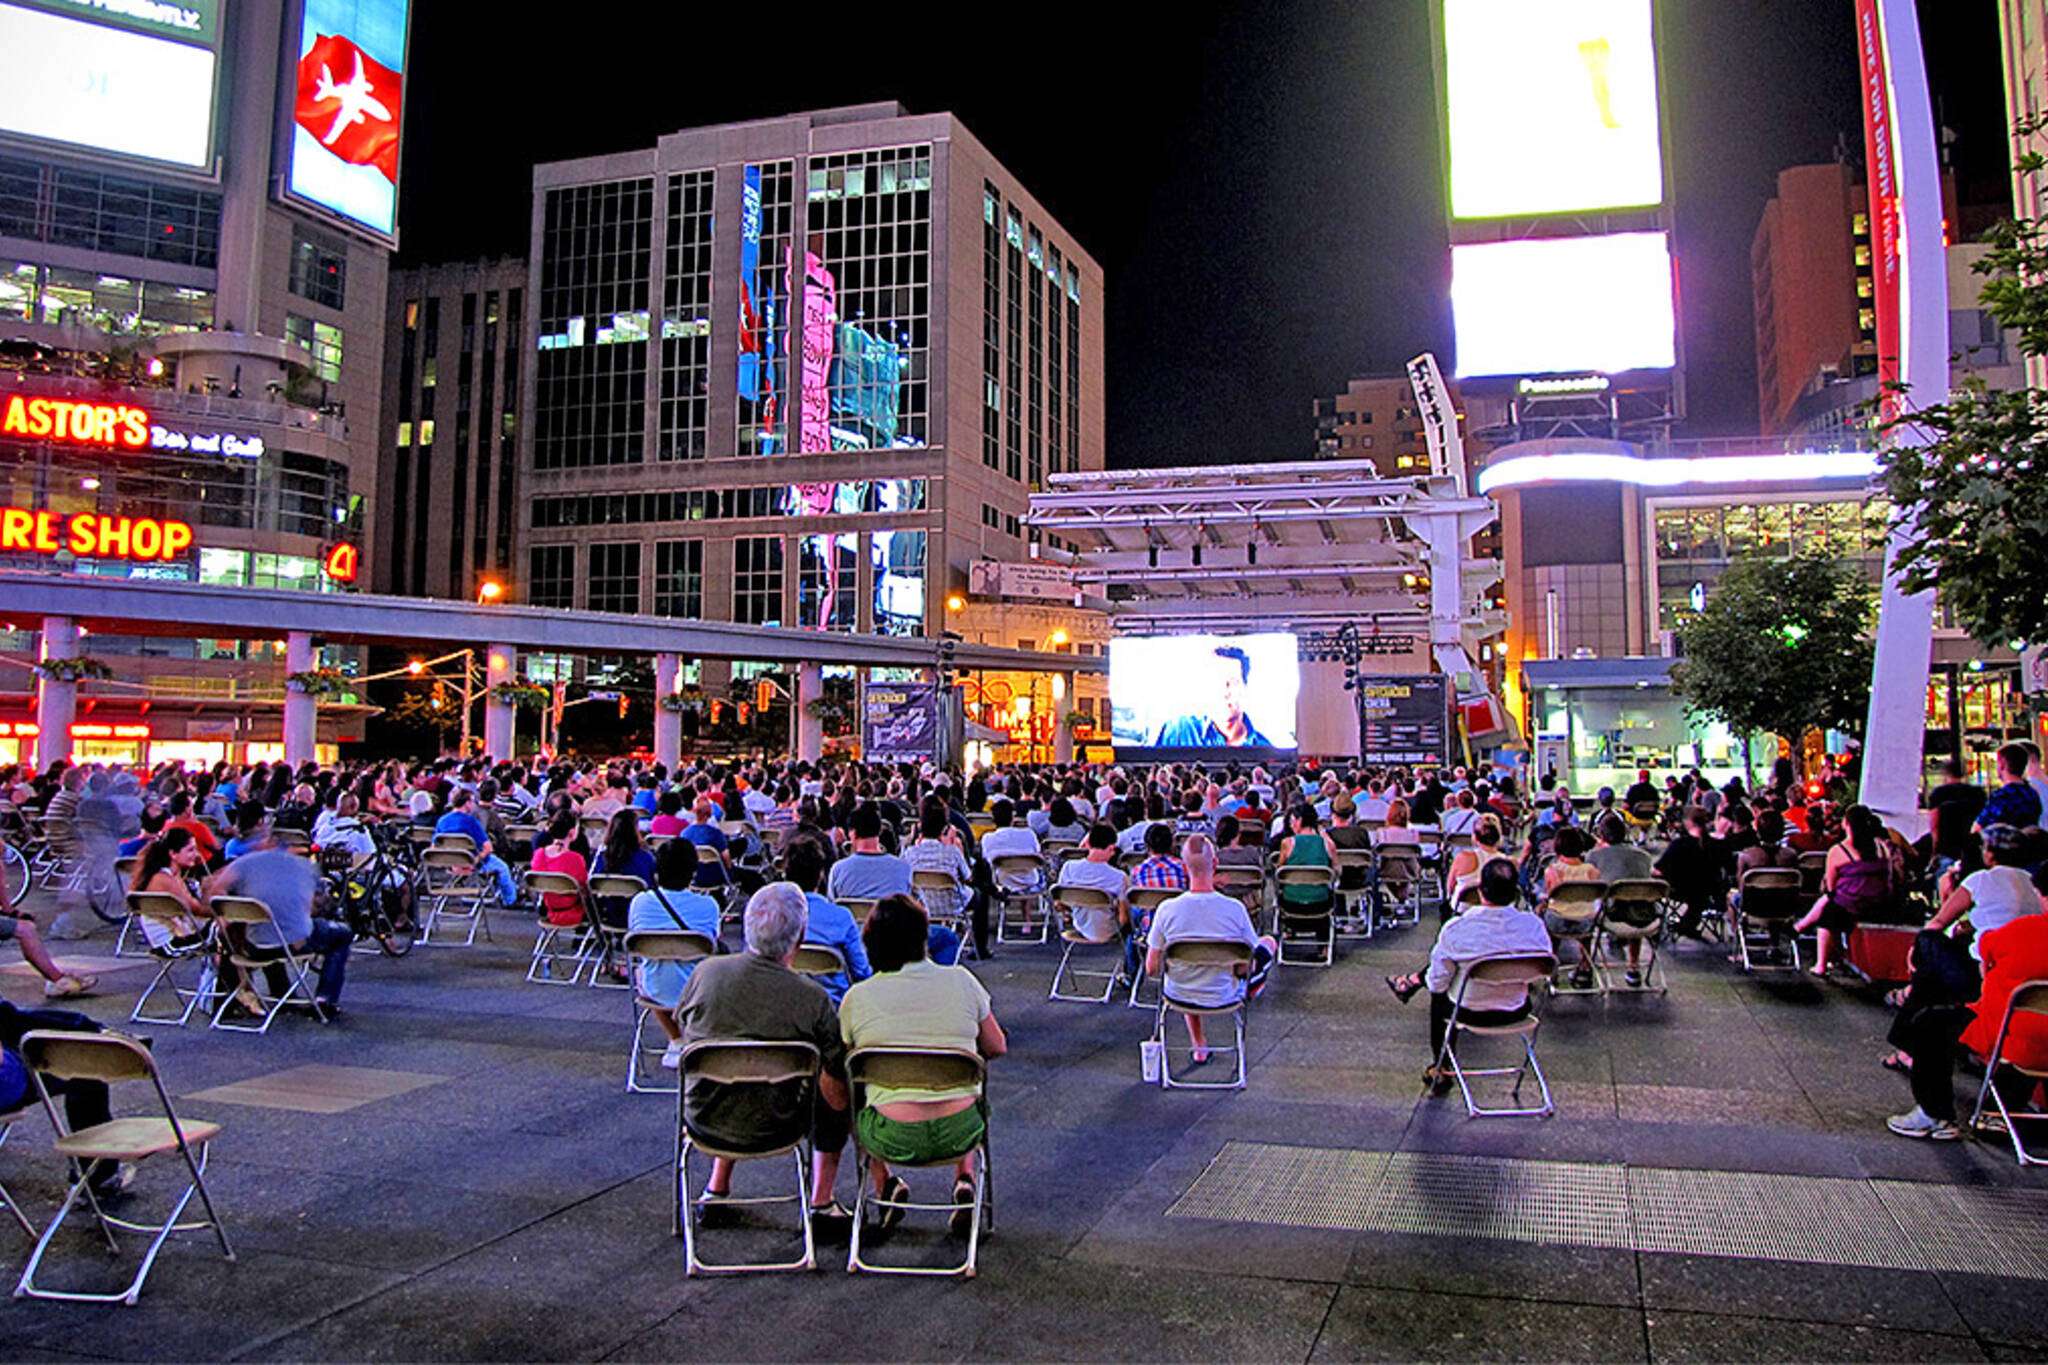 Here are all the free movies at Yonge & Dundas this summer